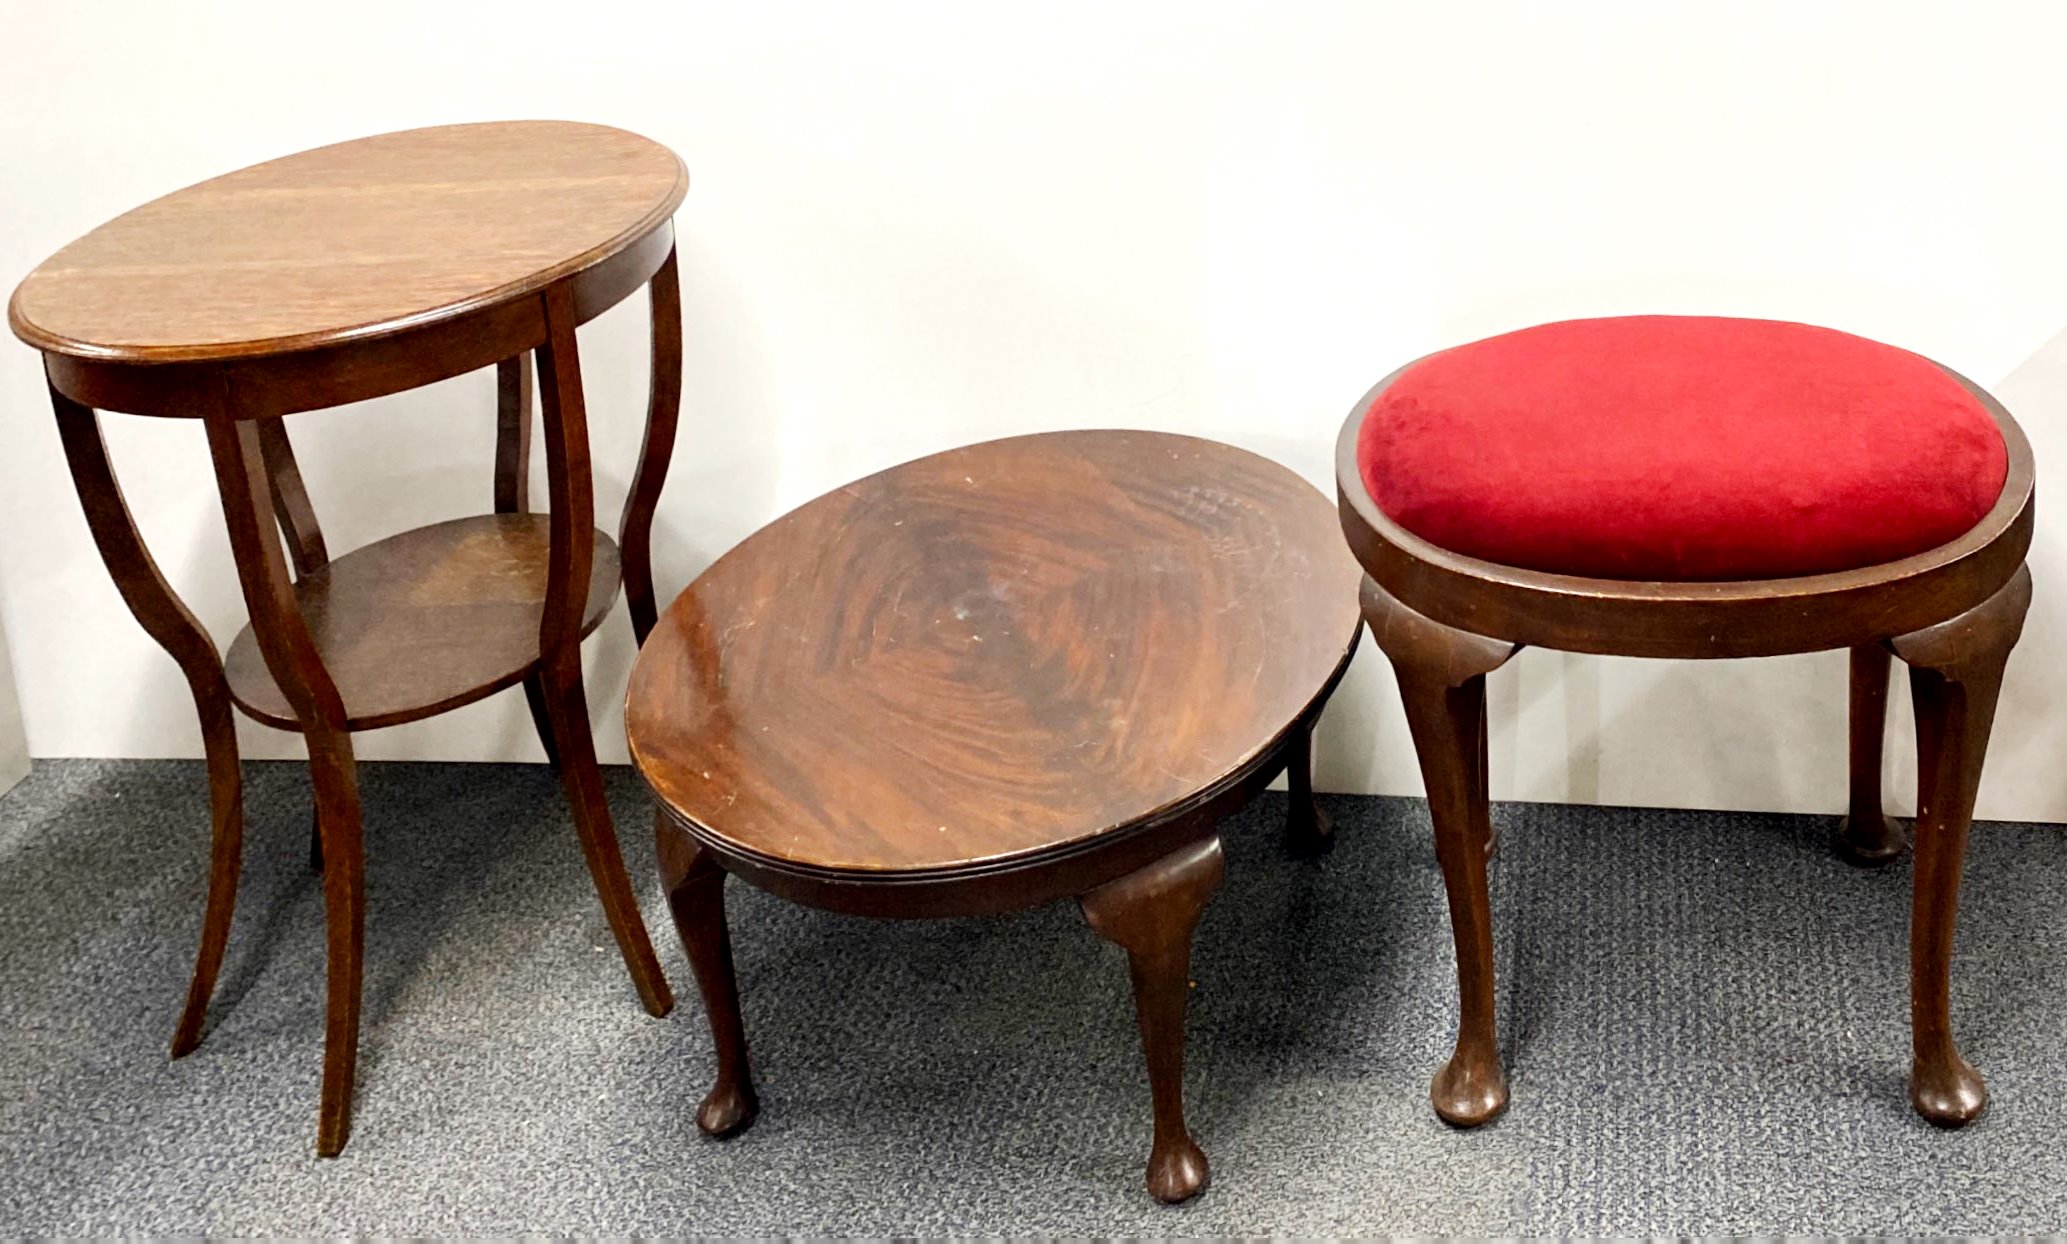 A mahogany dressing table stool and two circular side tables.